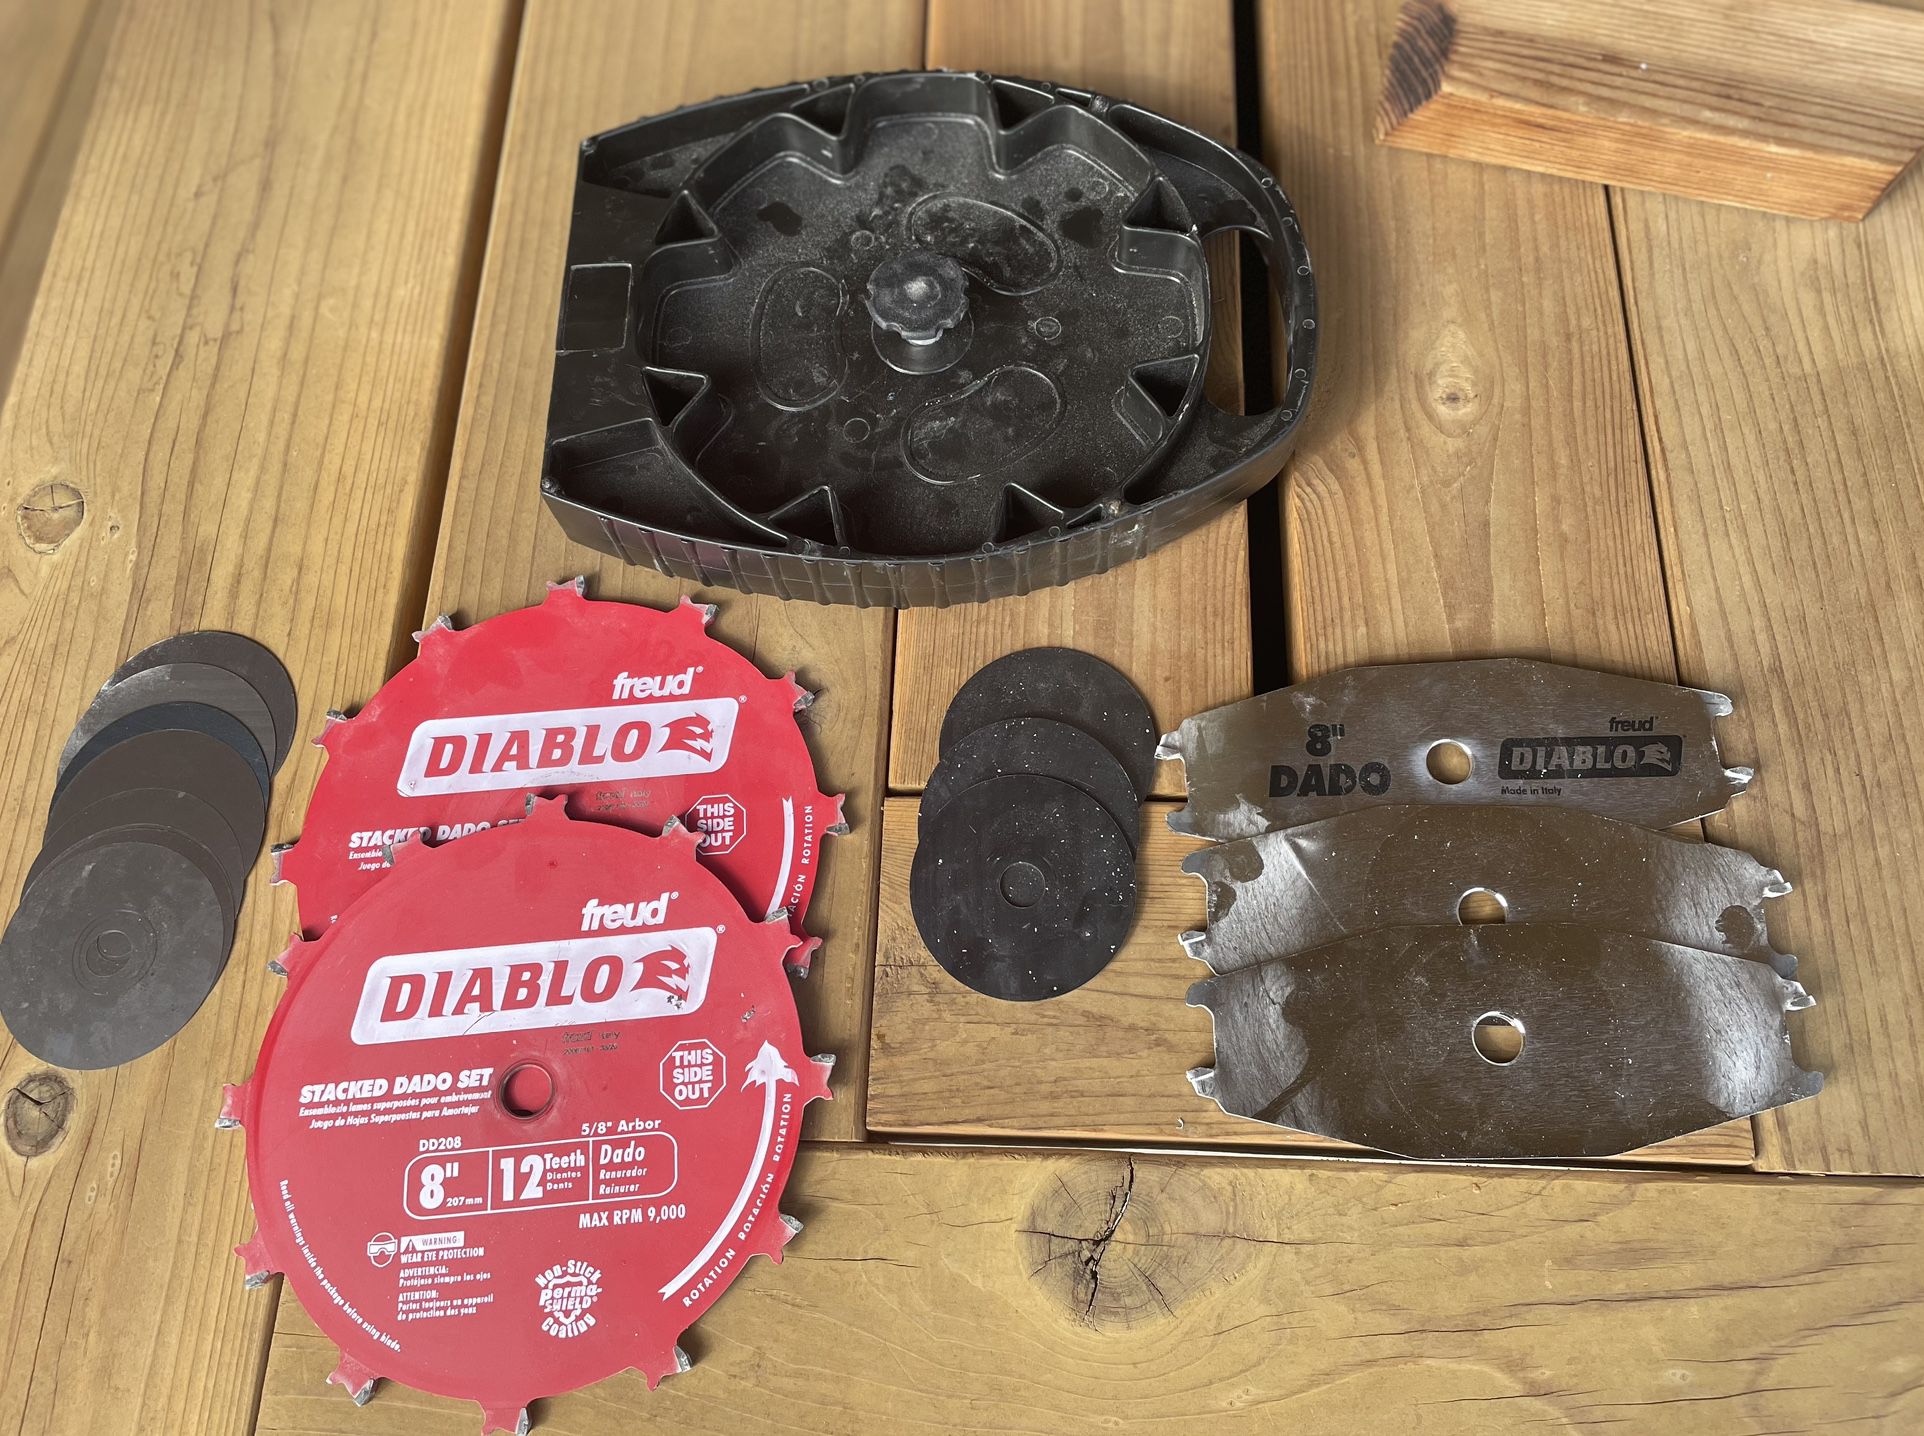 DIABLO 8 in. x 12-Tooth Stacked Dado Saw Blade Set